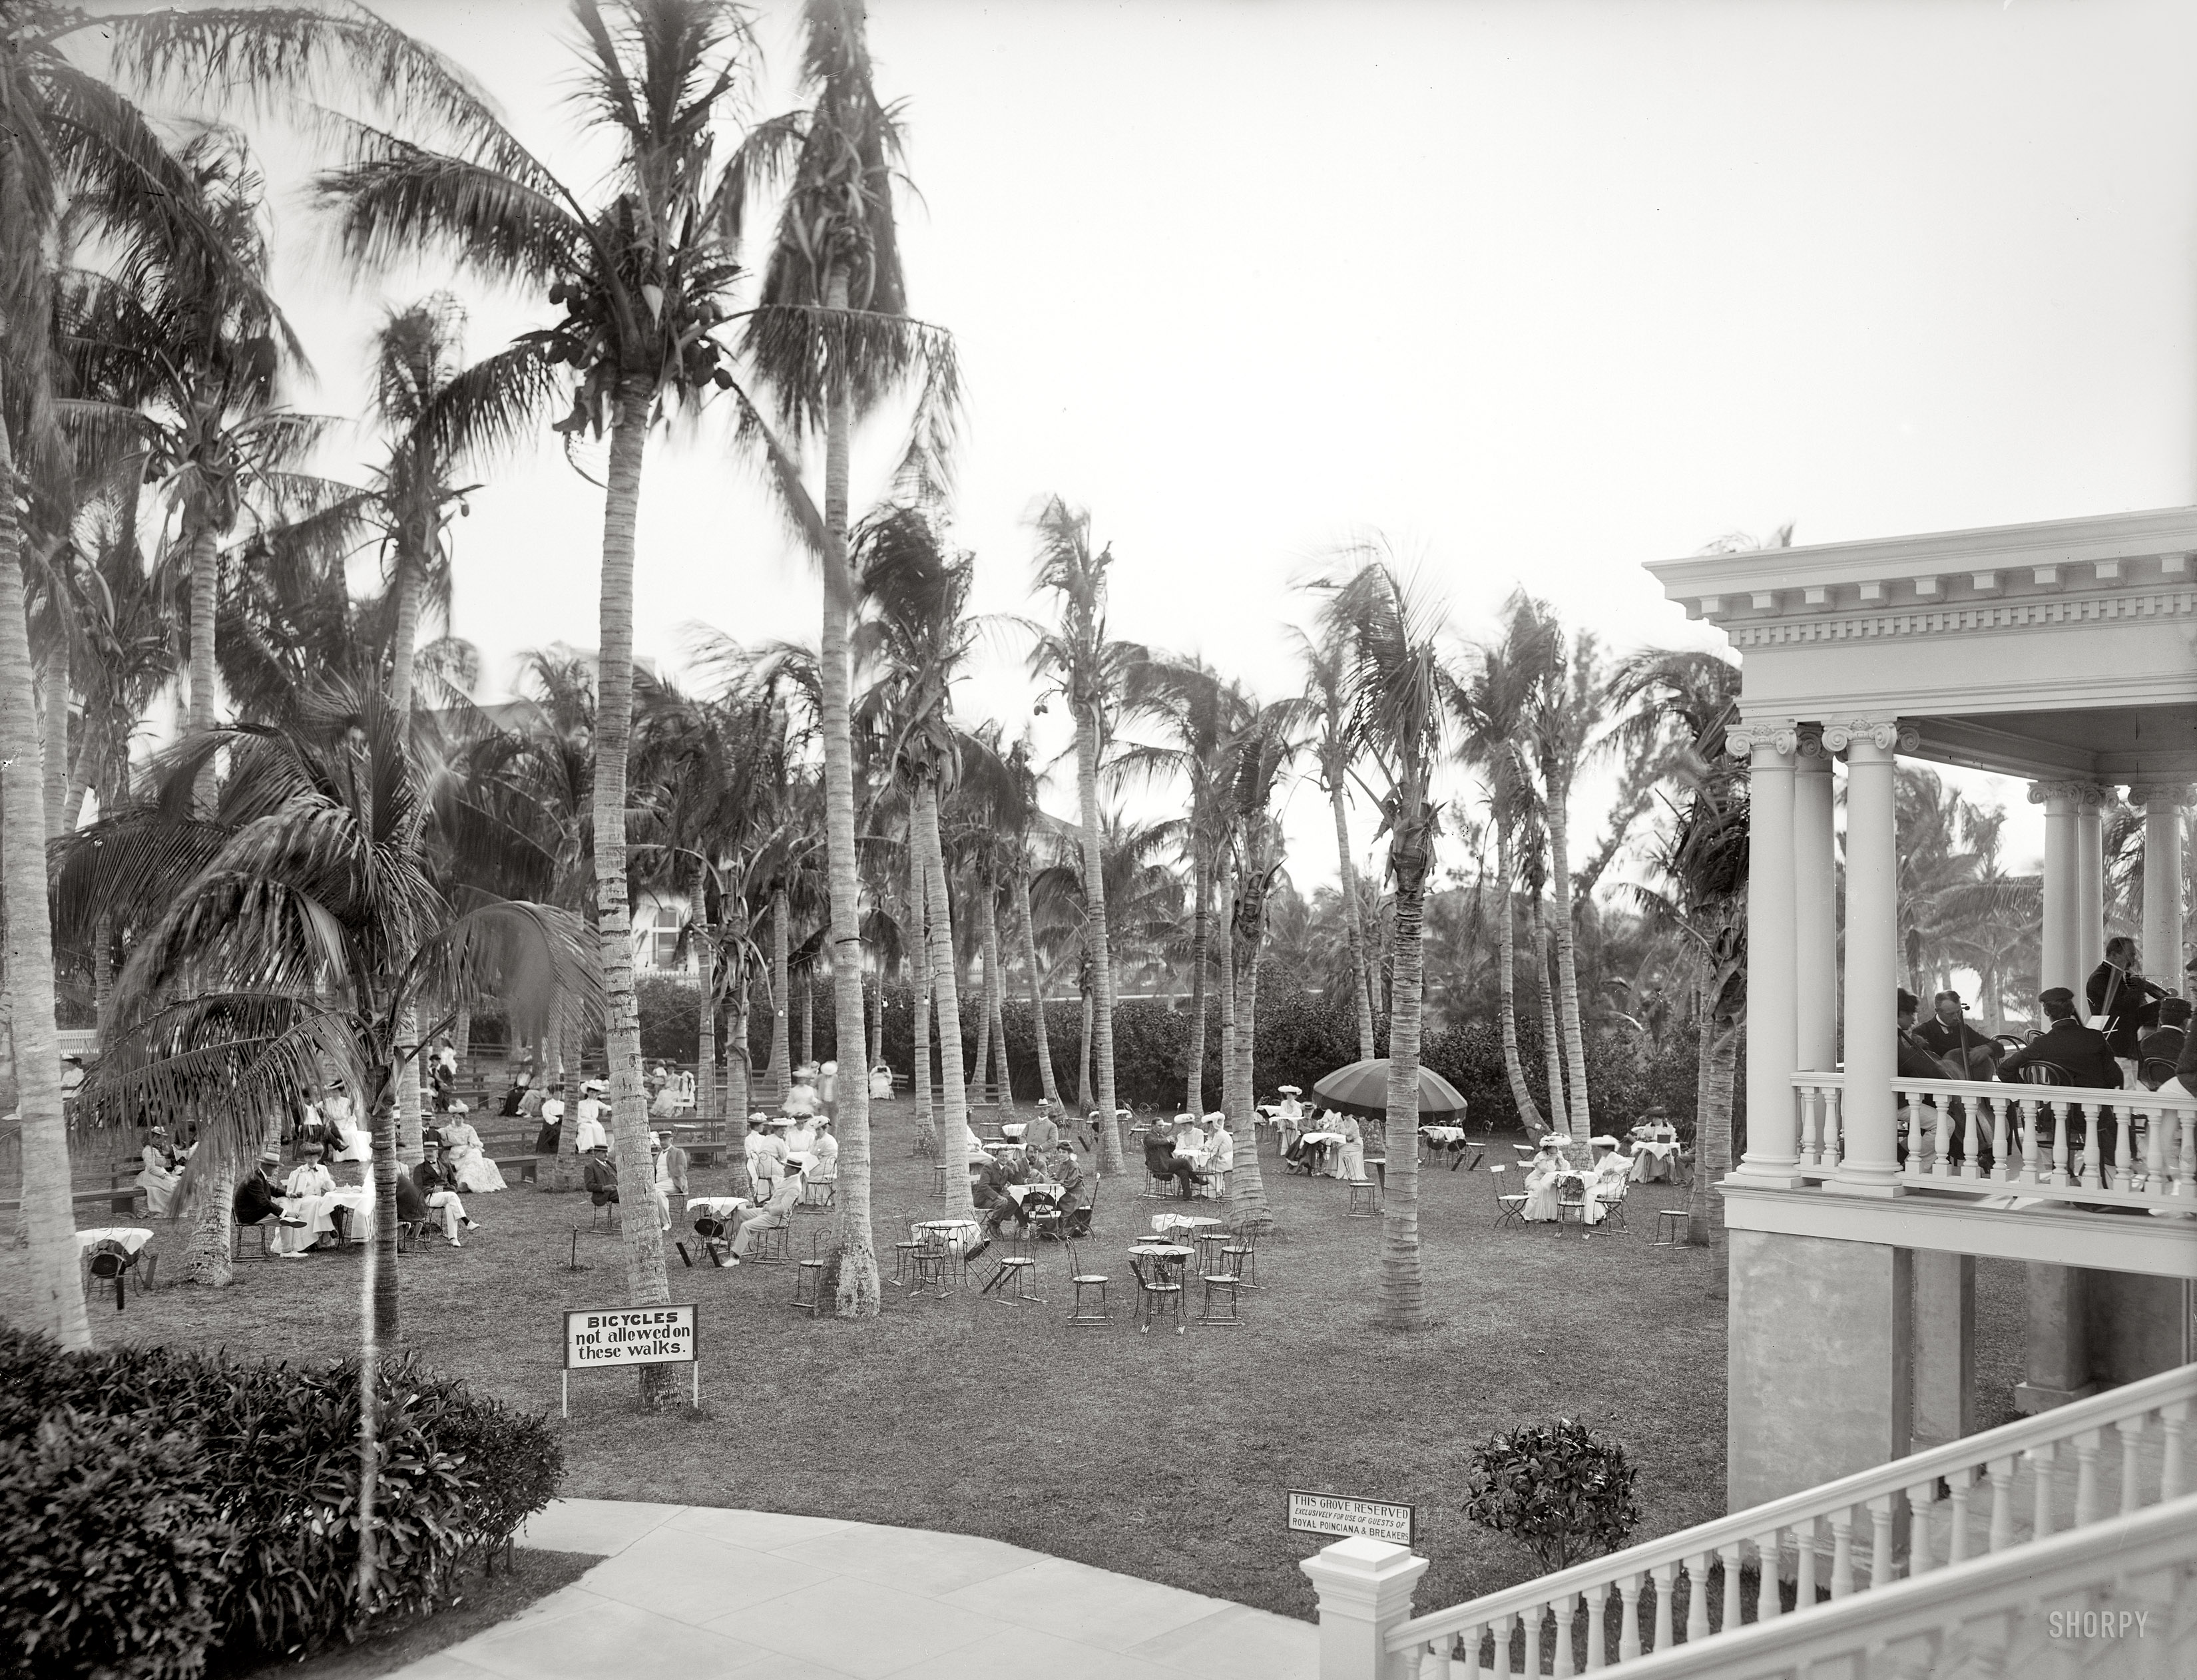 Florida circa 1904. "Afternoon concert hour. The Royal Poinciana, Palm Beach." We return to the RP for a bit of culture. And please, no velocipedes. 8x10 inch dry plate glass negative, Detroit Publishing Company. View full size.